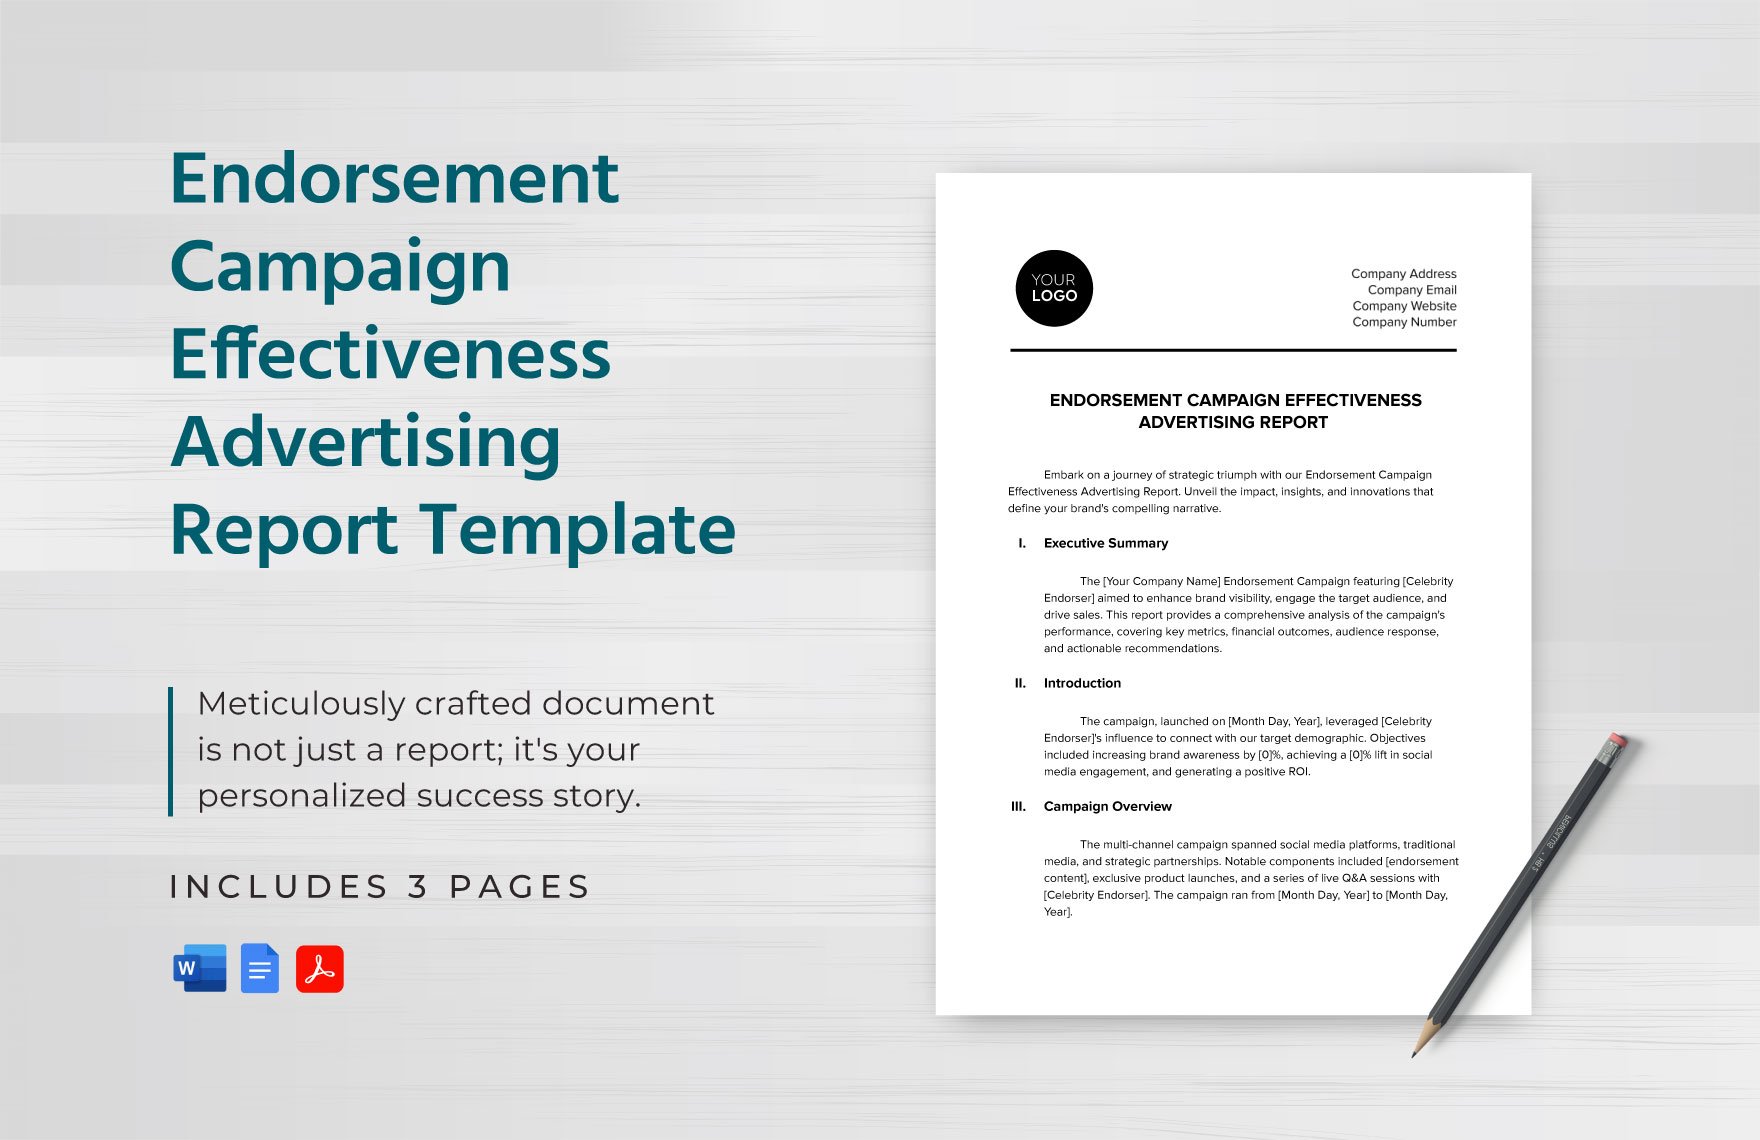 Endorsement Campaign Effectiveness Advertising Report Template in Word, Google Docs, PDF